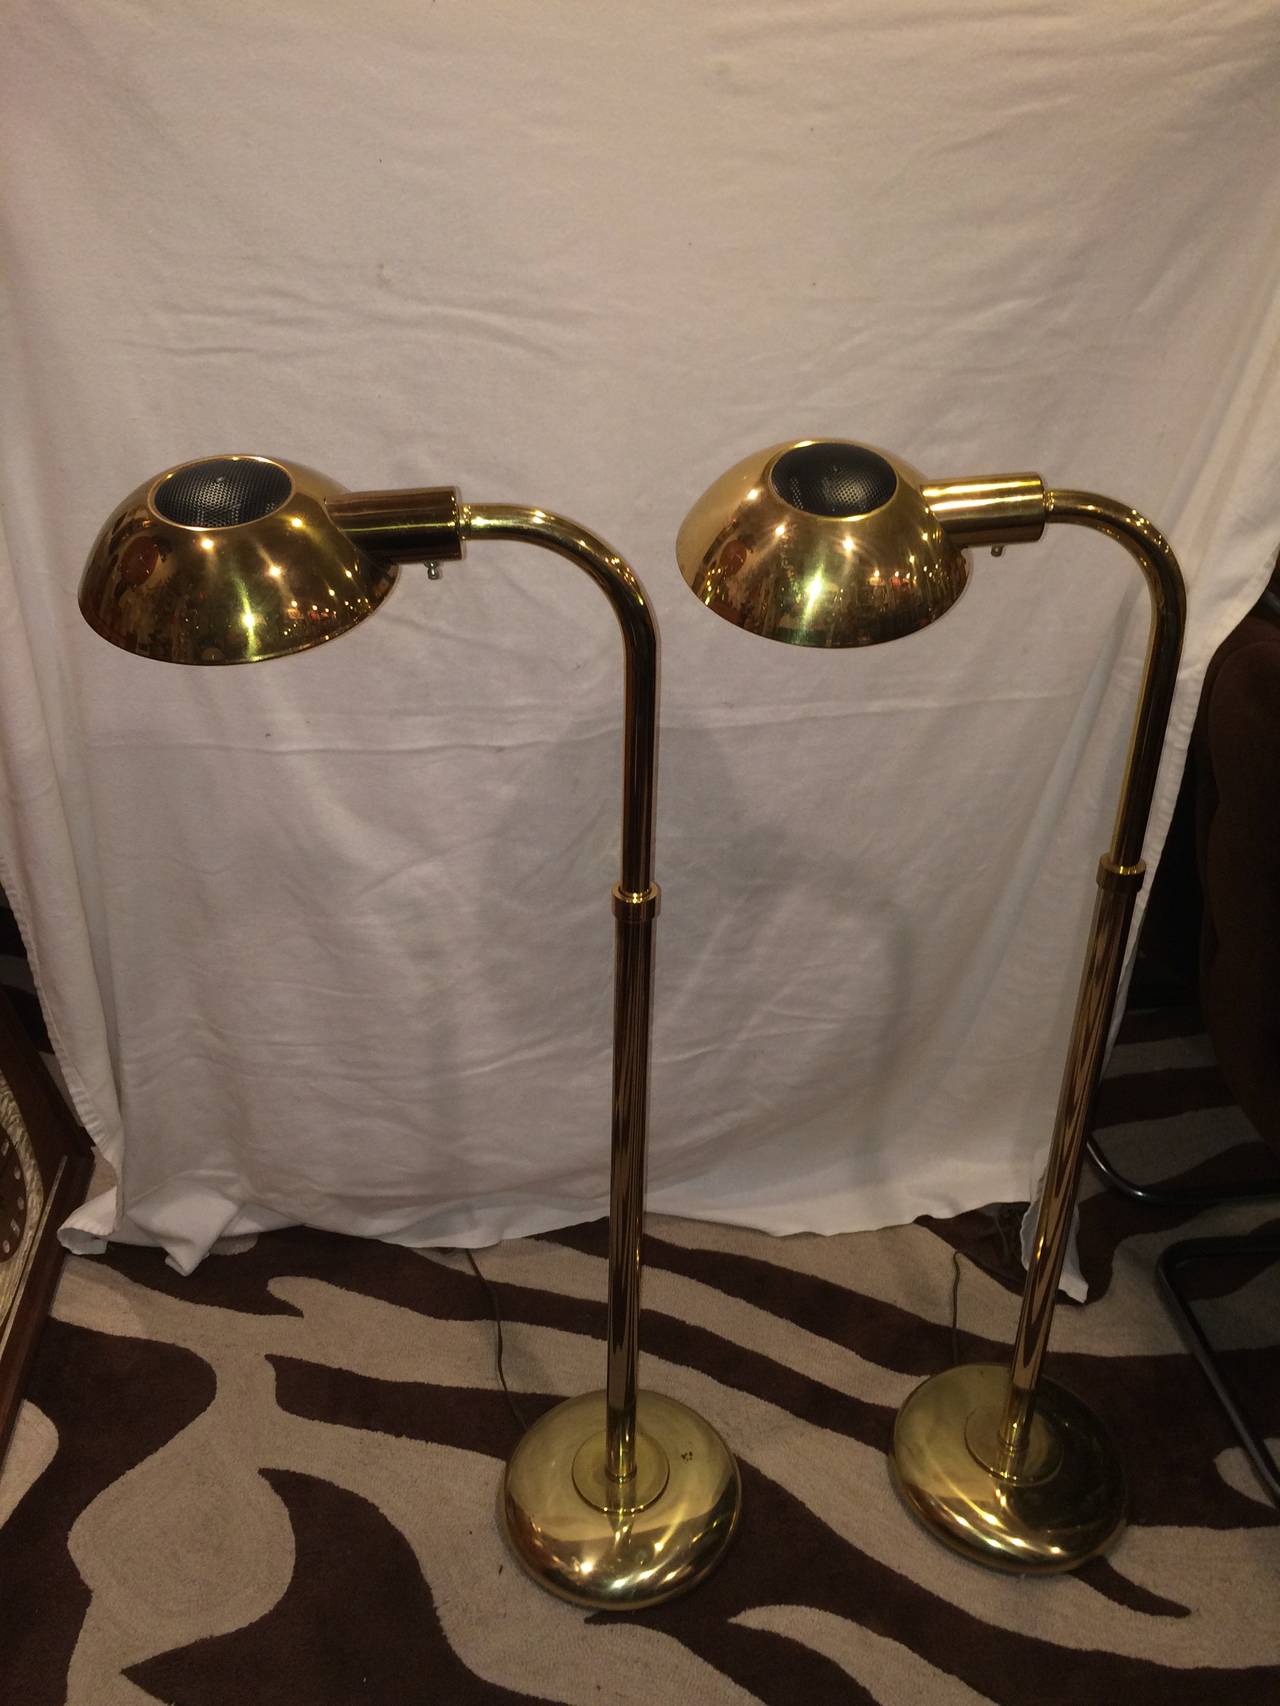 Plated Pair of Mid-Century Modern Brass Floor Lamps